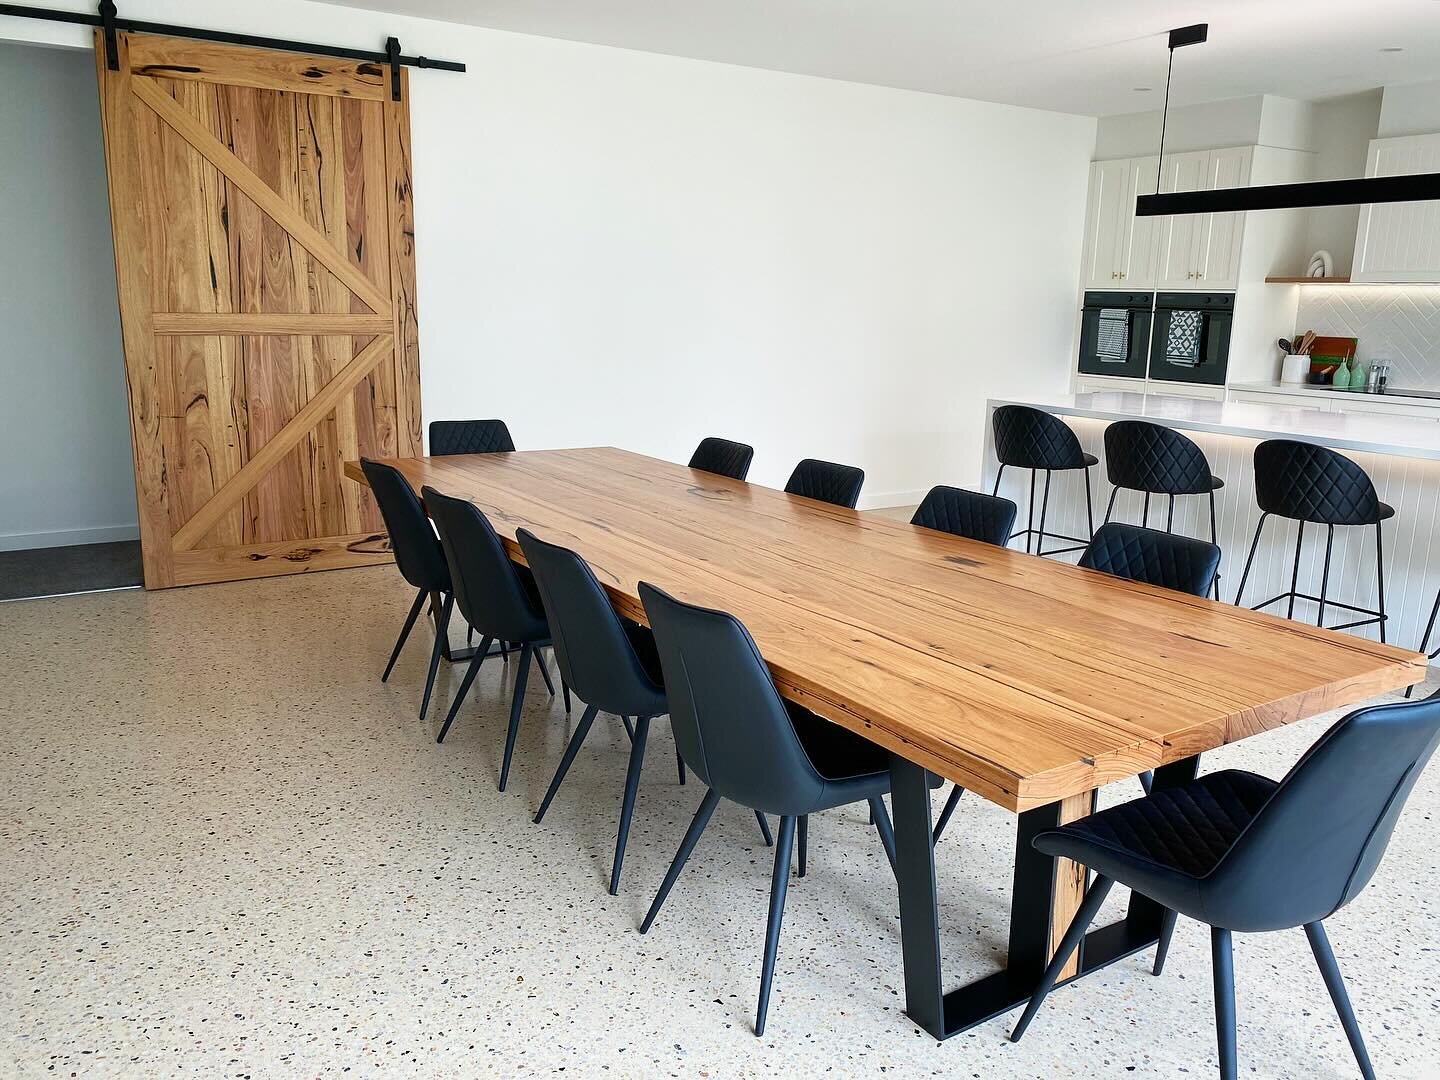 Big space needs a big barn door and an even bigger dining table! Beautiful splash of colour in Mitch and Rach&rsquo;s brand new build. Recycled Messmate Barn Door and Dining Table sits in this space perfectly 👌🏻
.
.
.
#recycled #messmate #diningtab